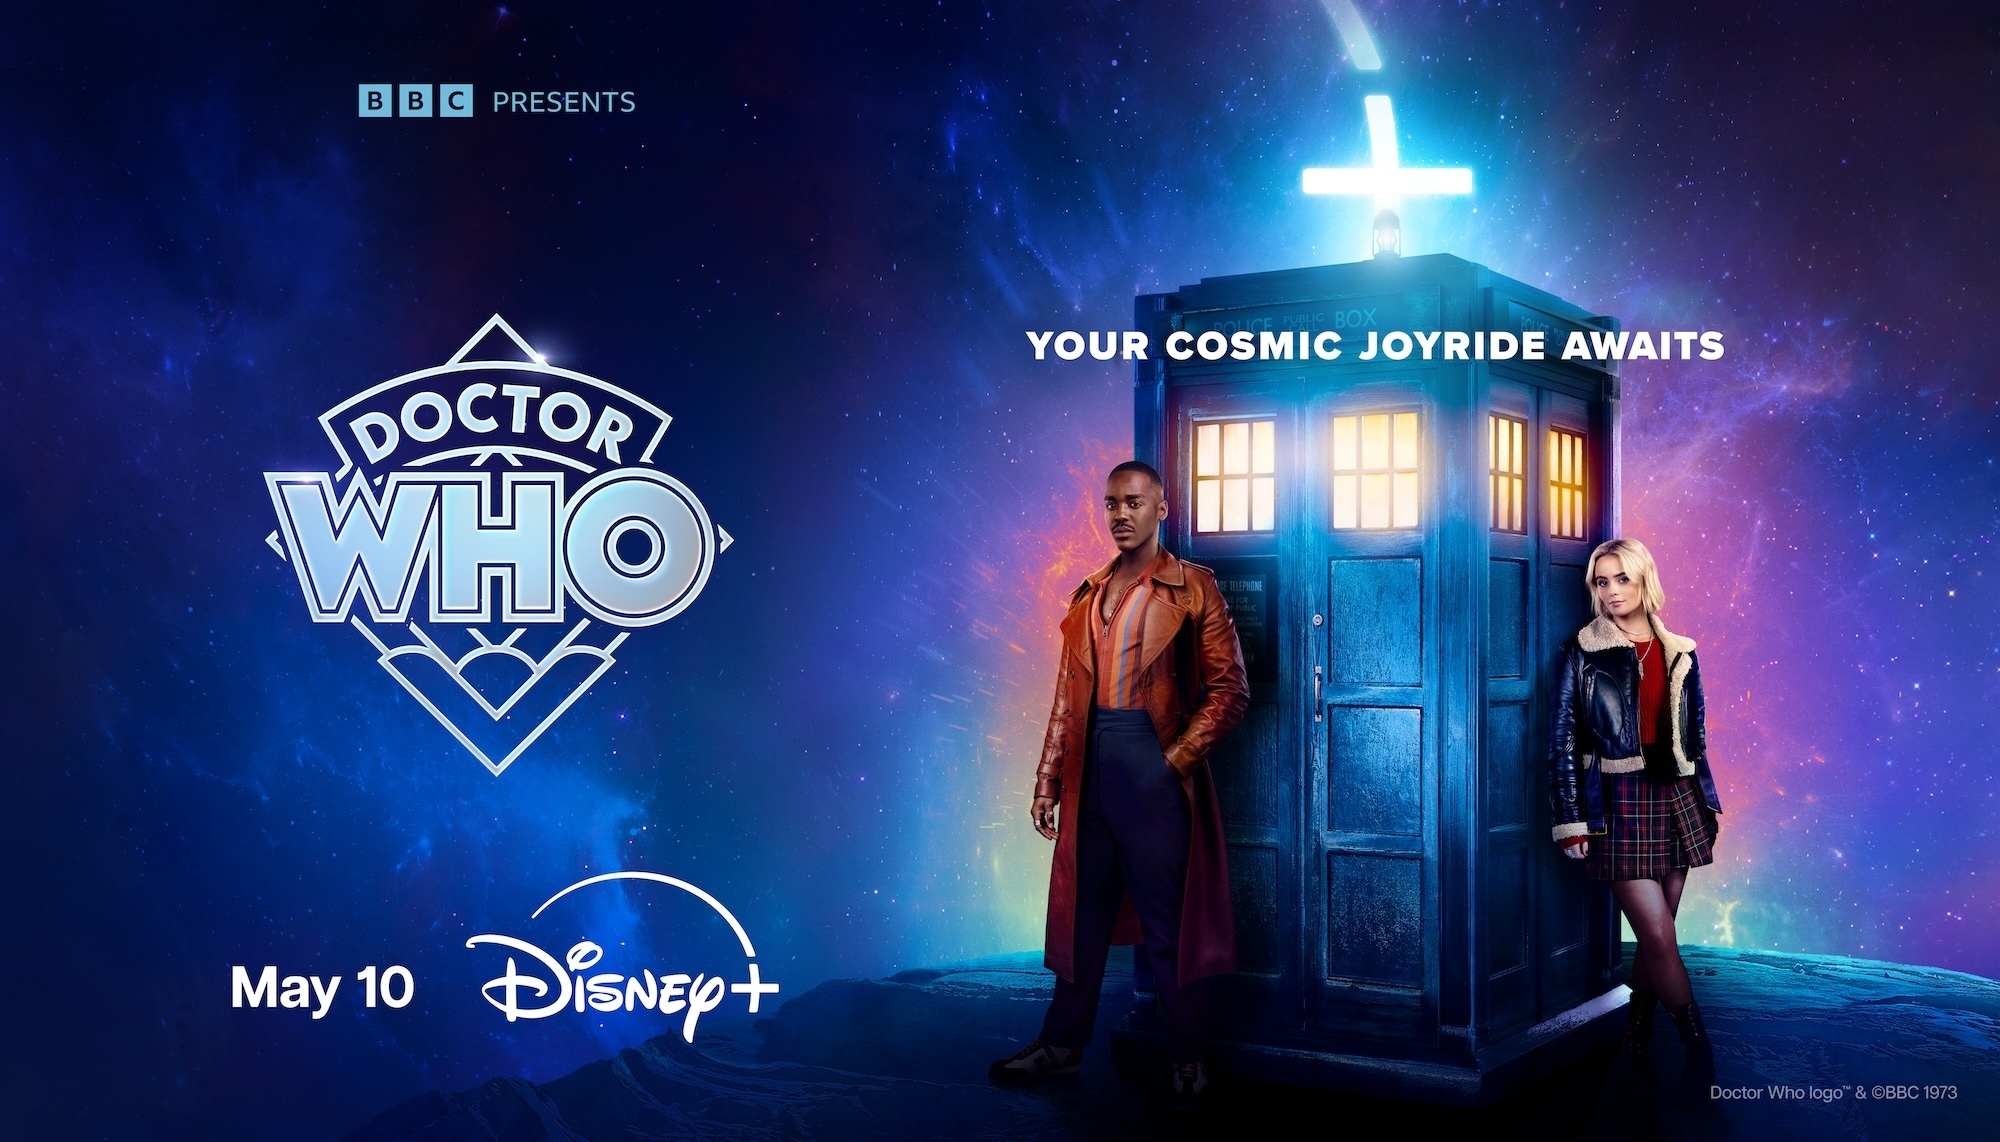 Disney+ Announces New Season of Doctor Who New Trailer And Premiere Date